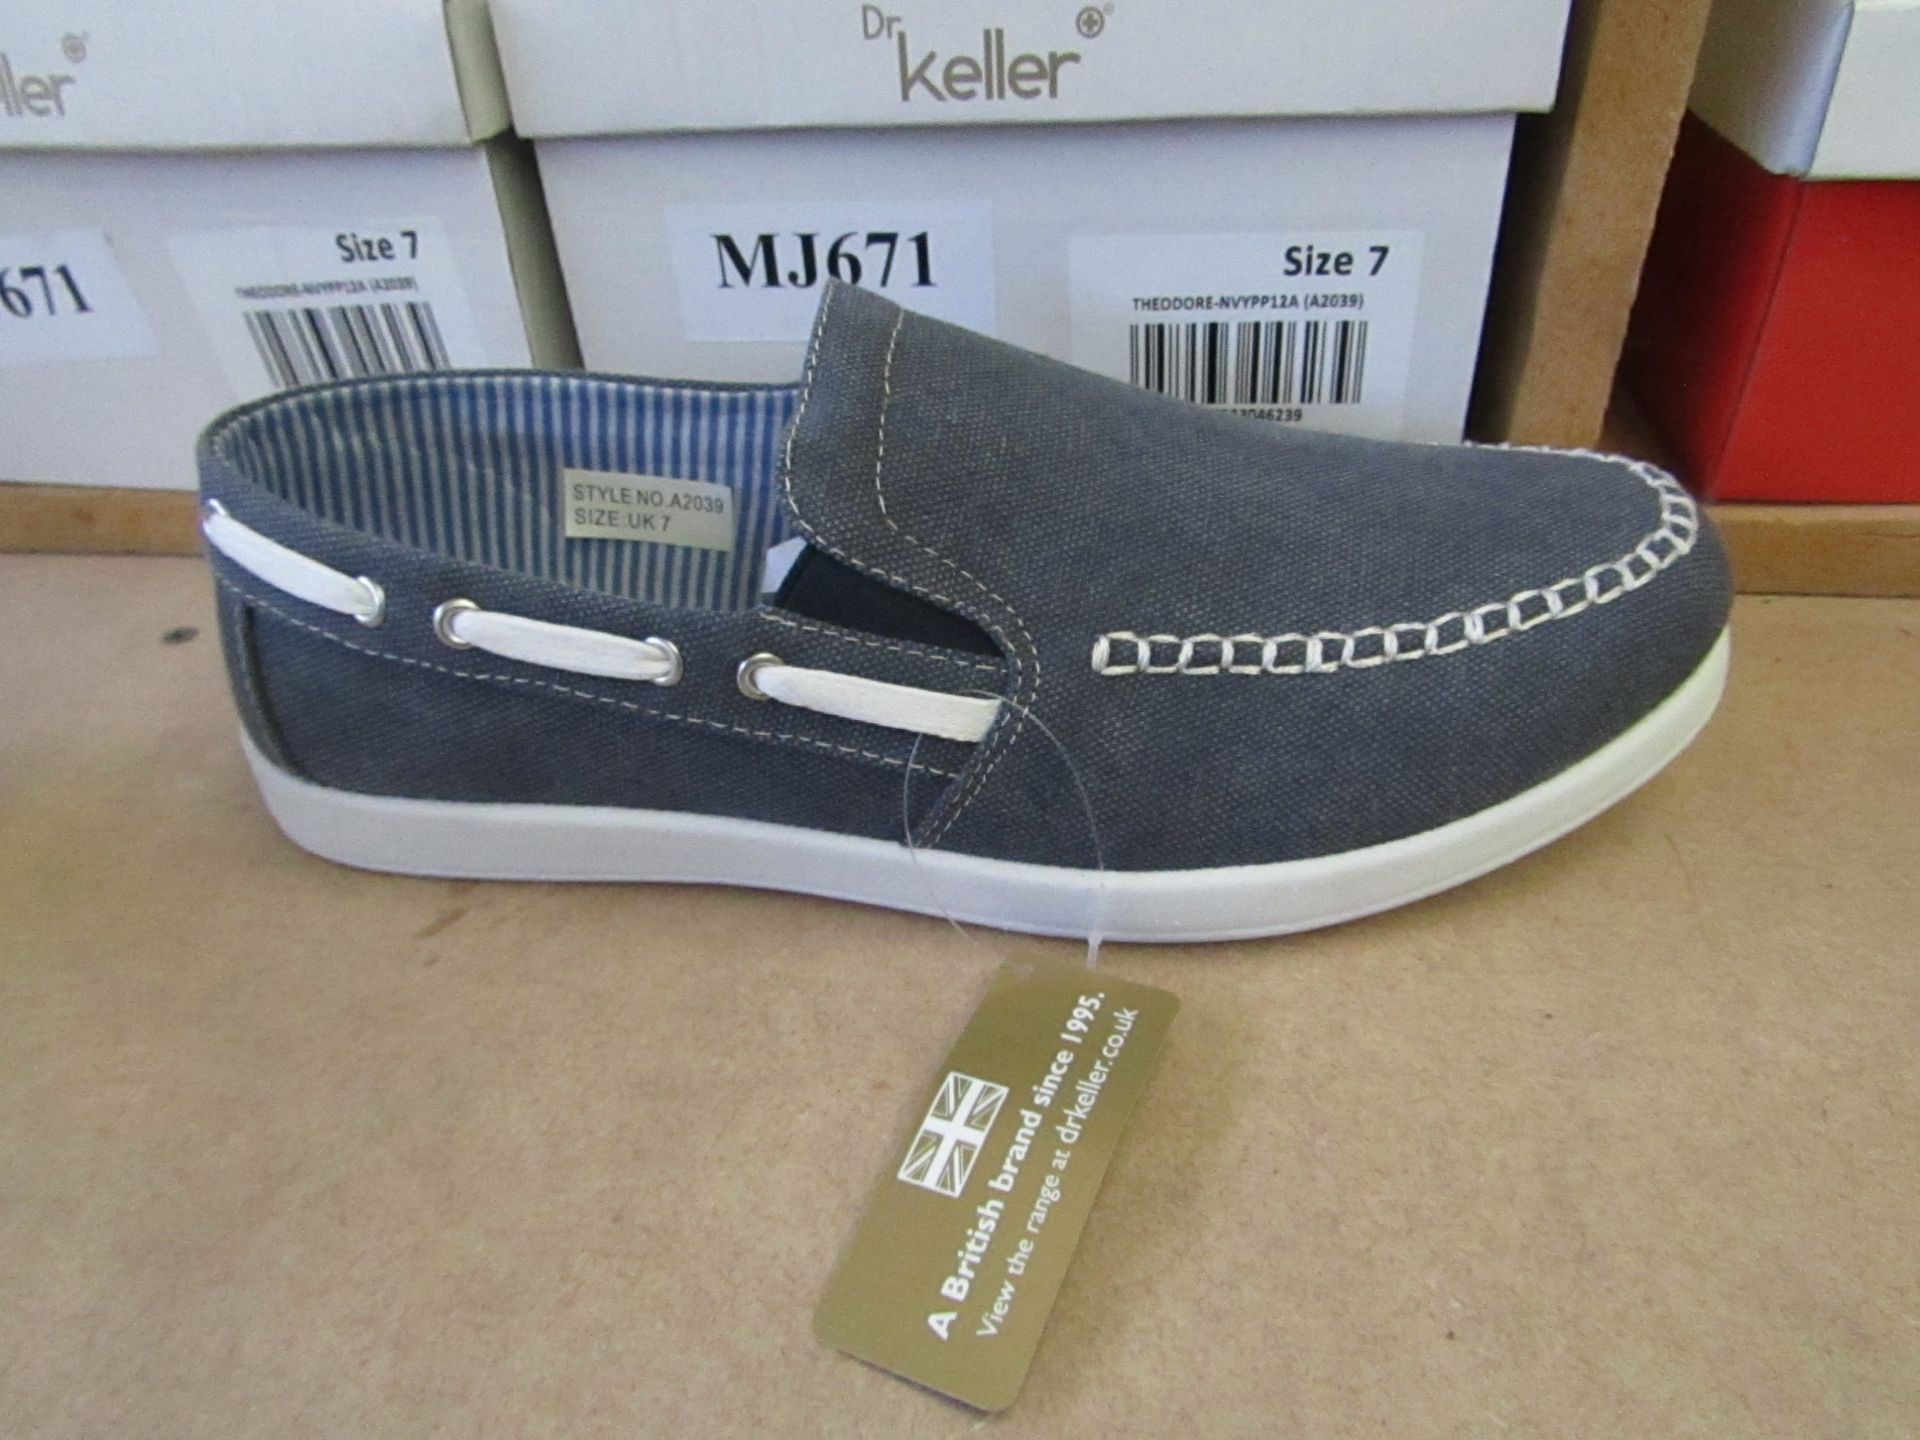 DR Keller Navy Boot Shoes, new and boxed, Size UK 7